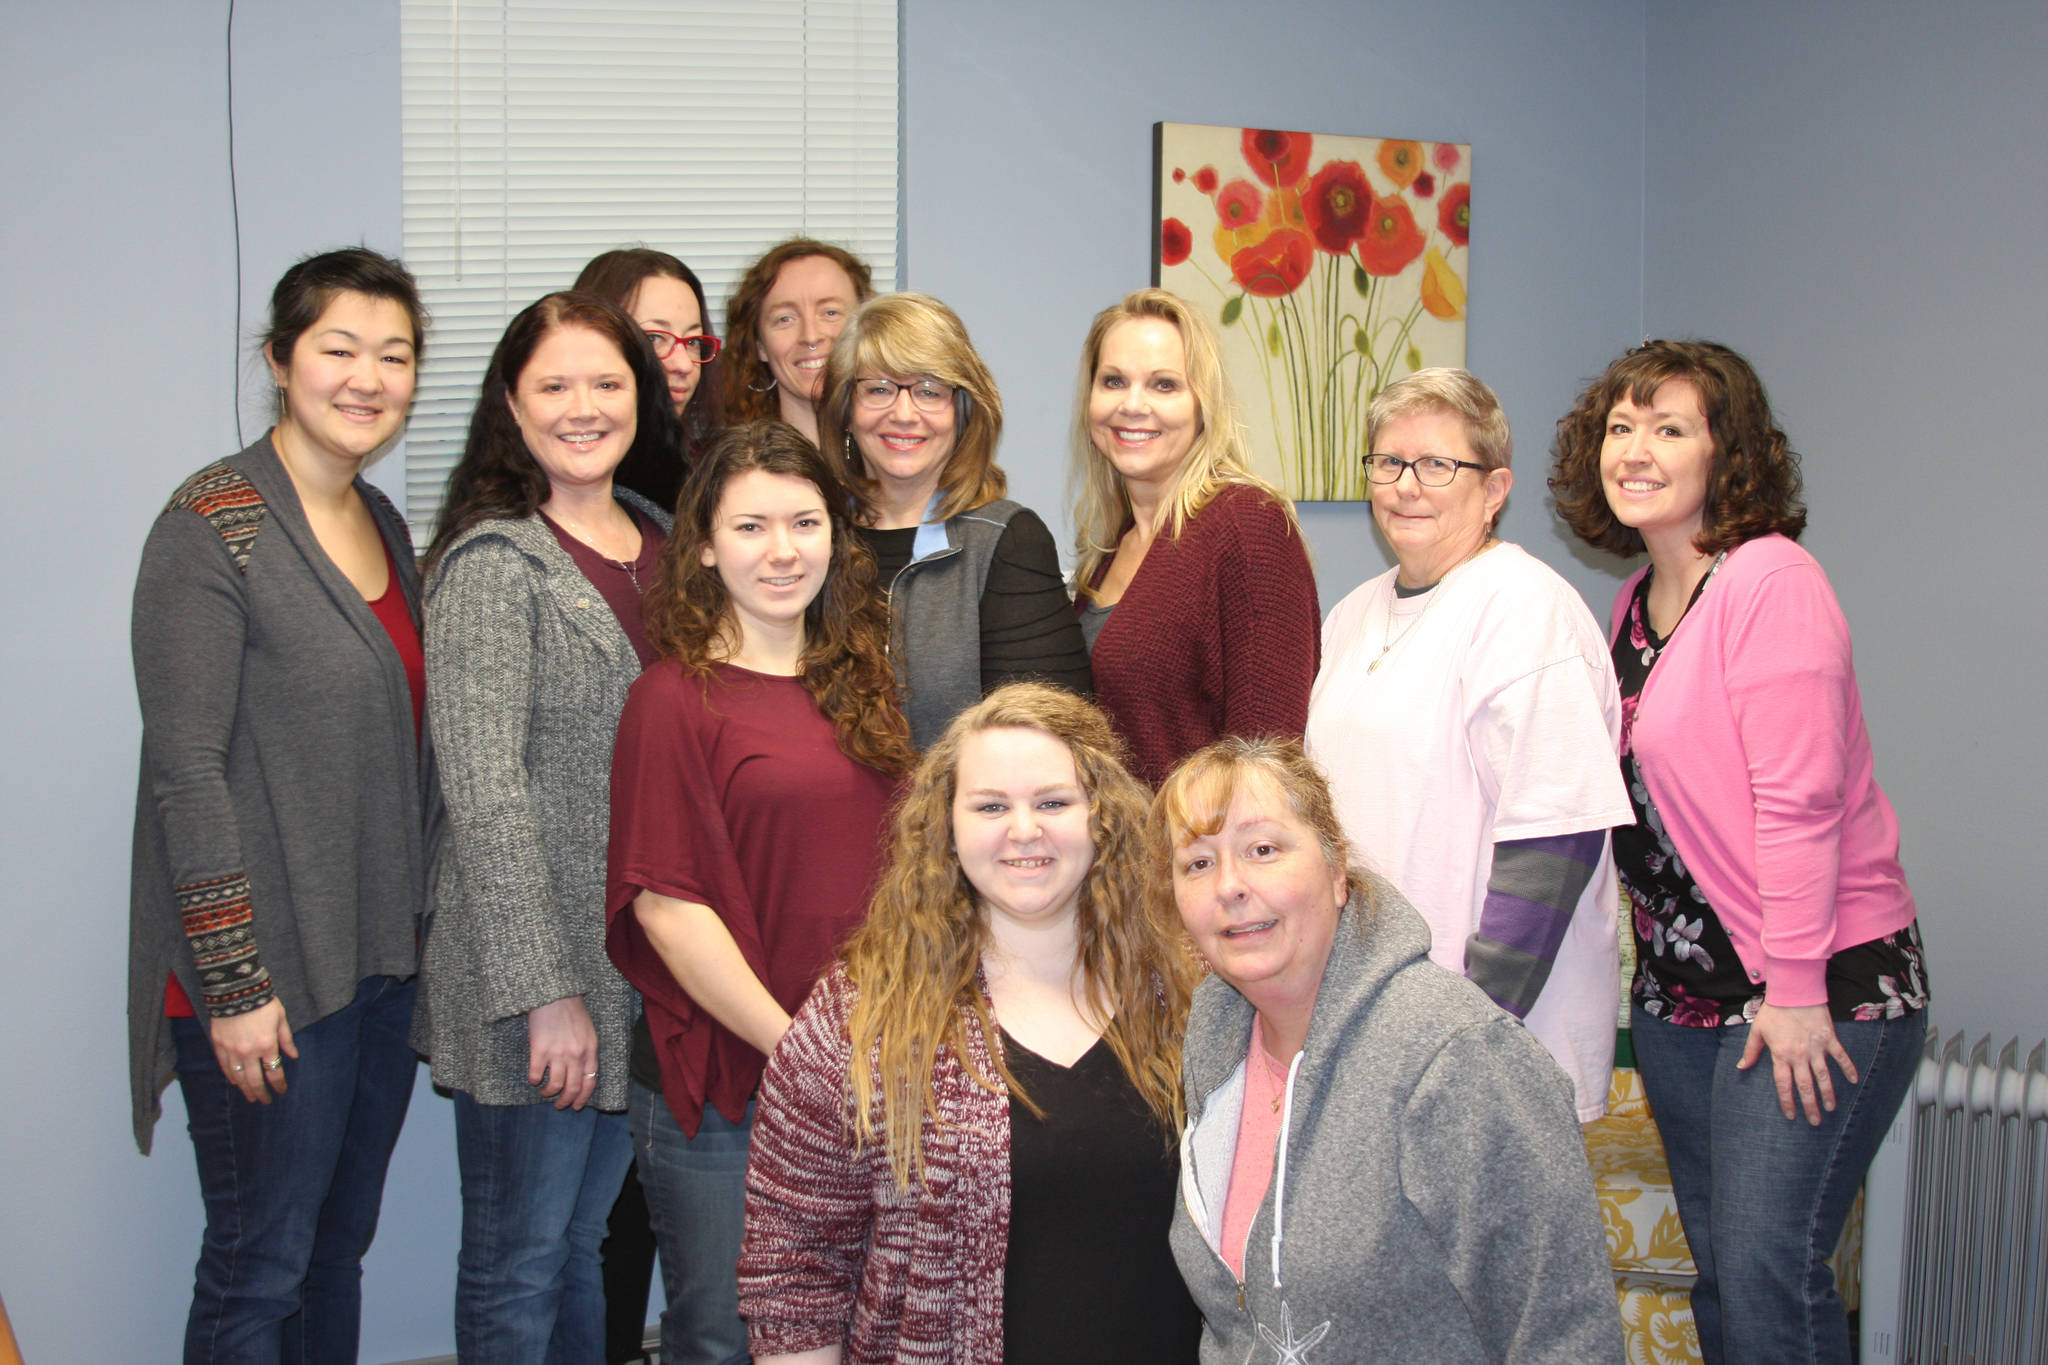 South Peninsula Haven House staff gather together at the Haven House facility on Lake Street in Homer, Alaska, on Monday, Jan.22, 2018. From left to right, front row, are Danielle Kline, Elizabeth Doan; back row, left to right, Lindsey Collins, Angie Cramer, Jenna Kropf, Leslie Scroggin, Carolyn Westbrook, Maggie Lush, Ronnie Leach, Mary Jo Gates and Carla Carrico. (Photo by Delcenia Cosman)